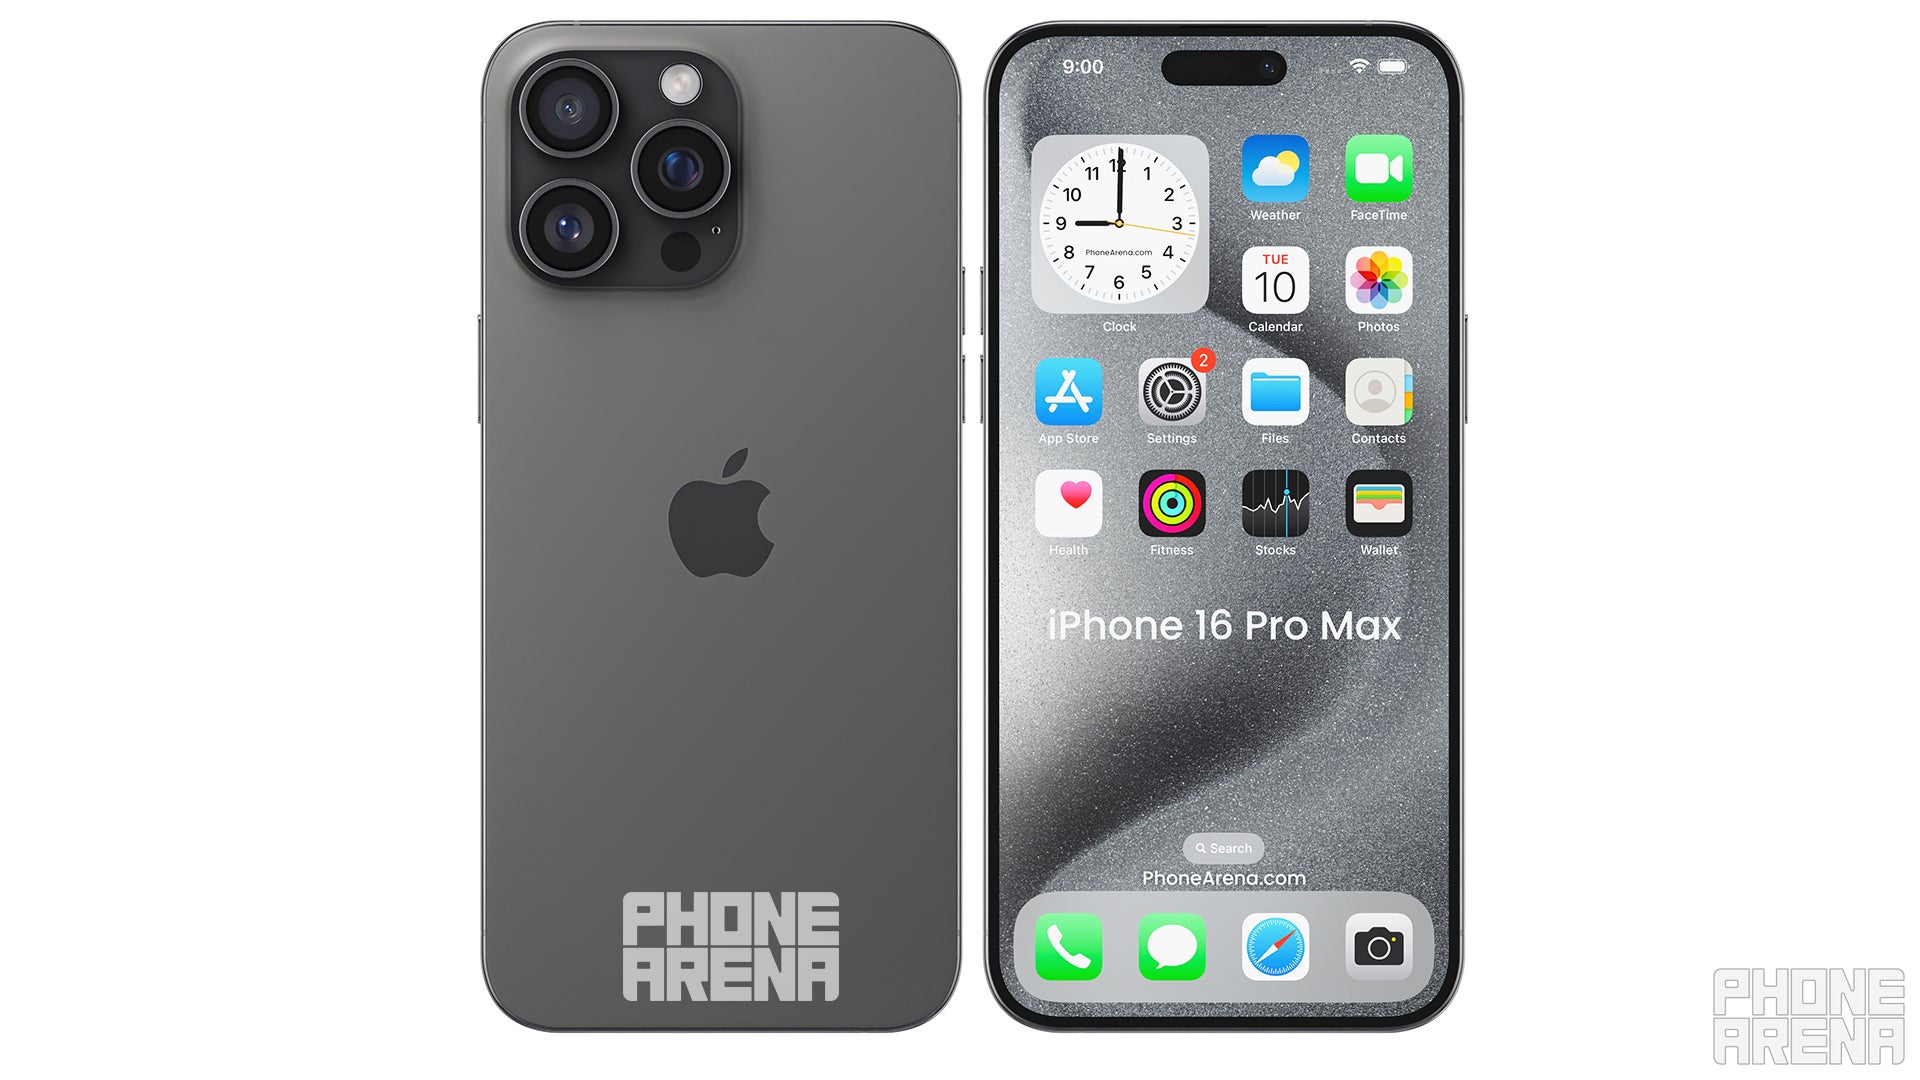 Image credit — PhoneArena - Apple might achieve the bezel-less dream with the iPhone 16 Pro but how?